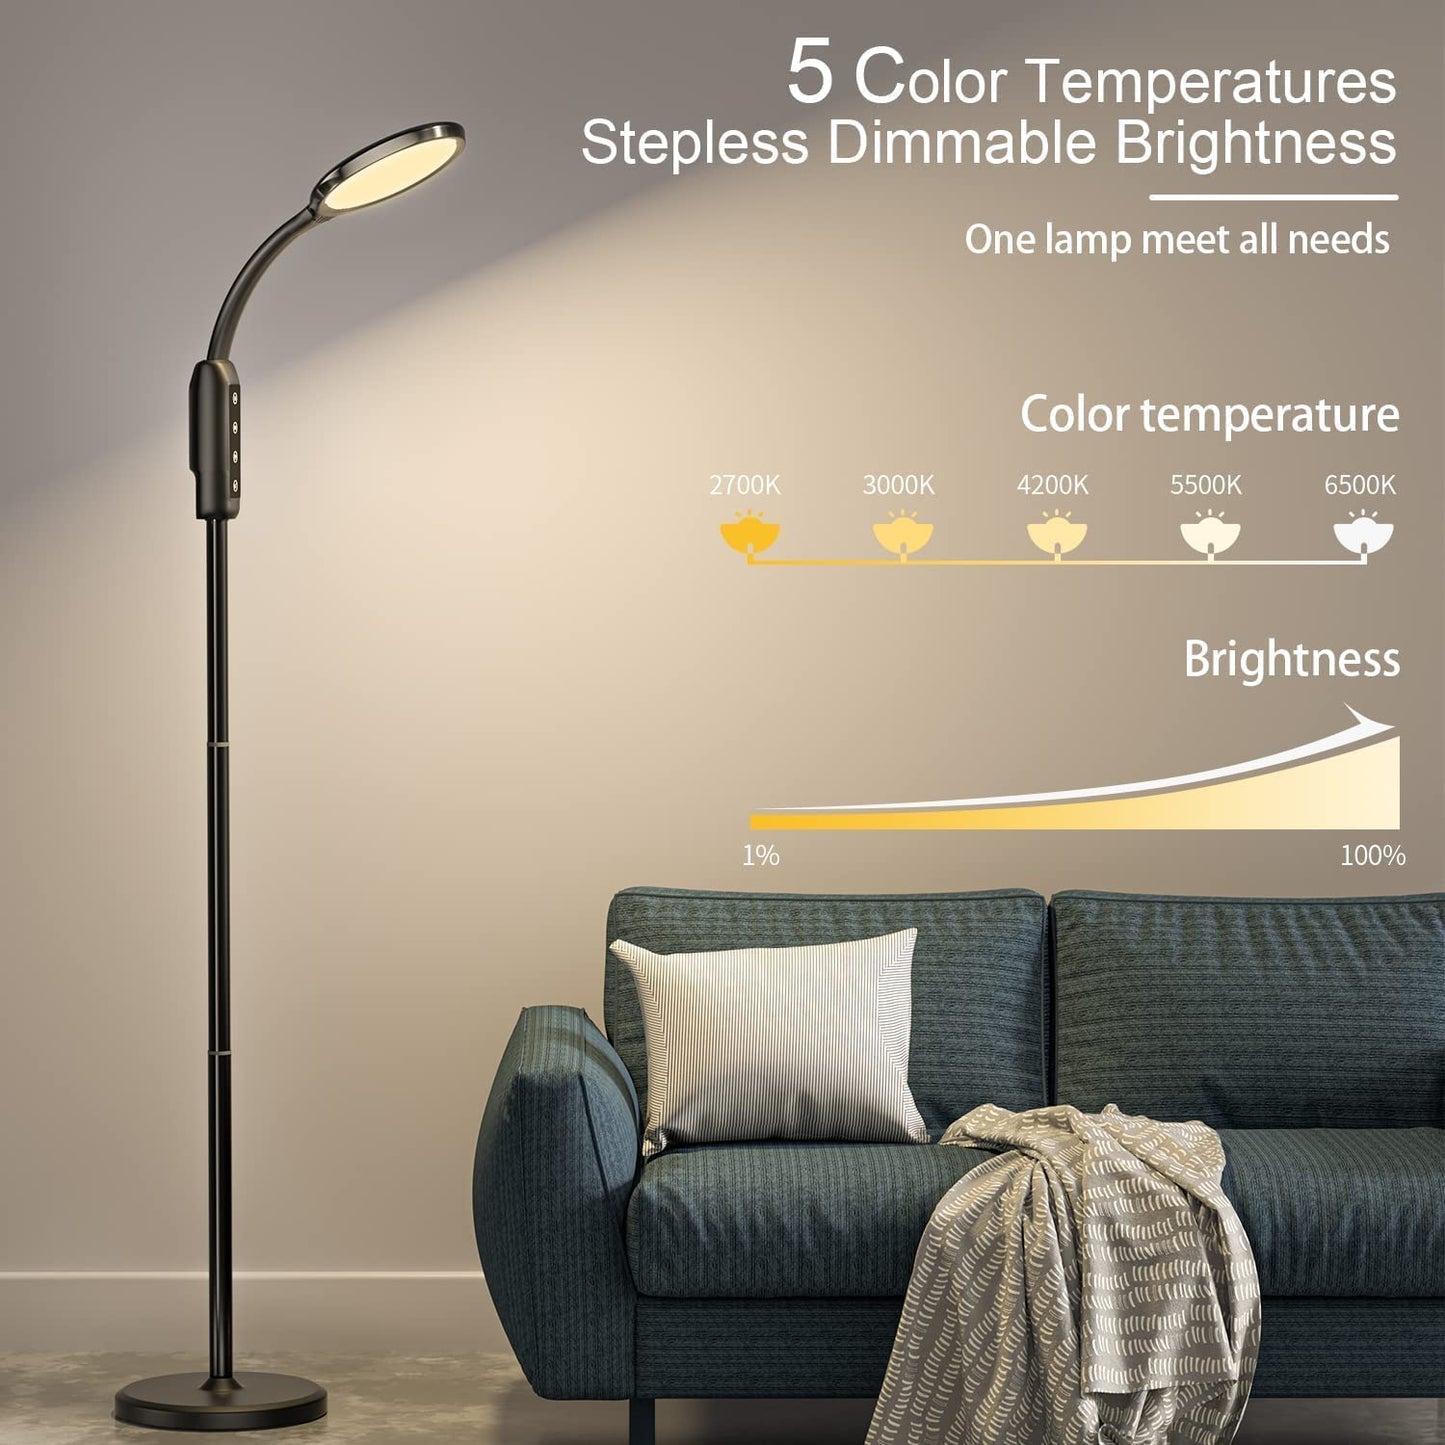 Floor Lamp for Living Room, Standing Lamp with Adjustable Brightness Flexible Gooseneck, Smart Lamp Remote App Control, Rechargeable Battery Operated Outdoor Lamp, Work Light for Reading, Crafts